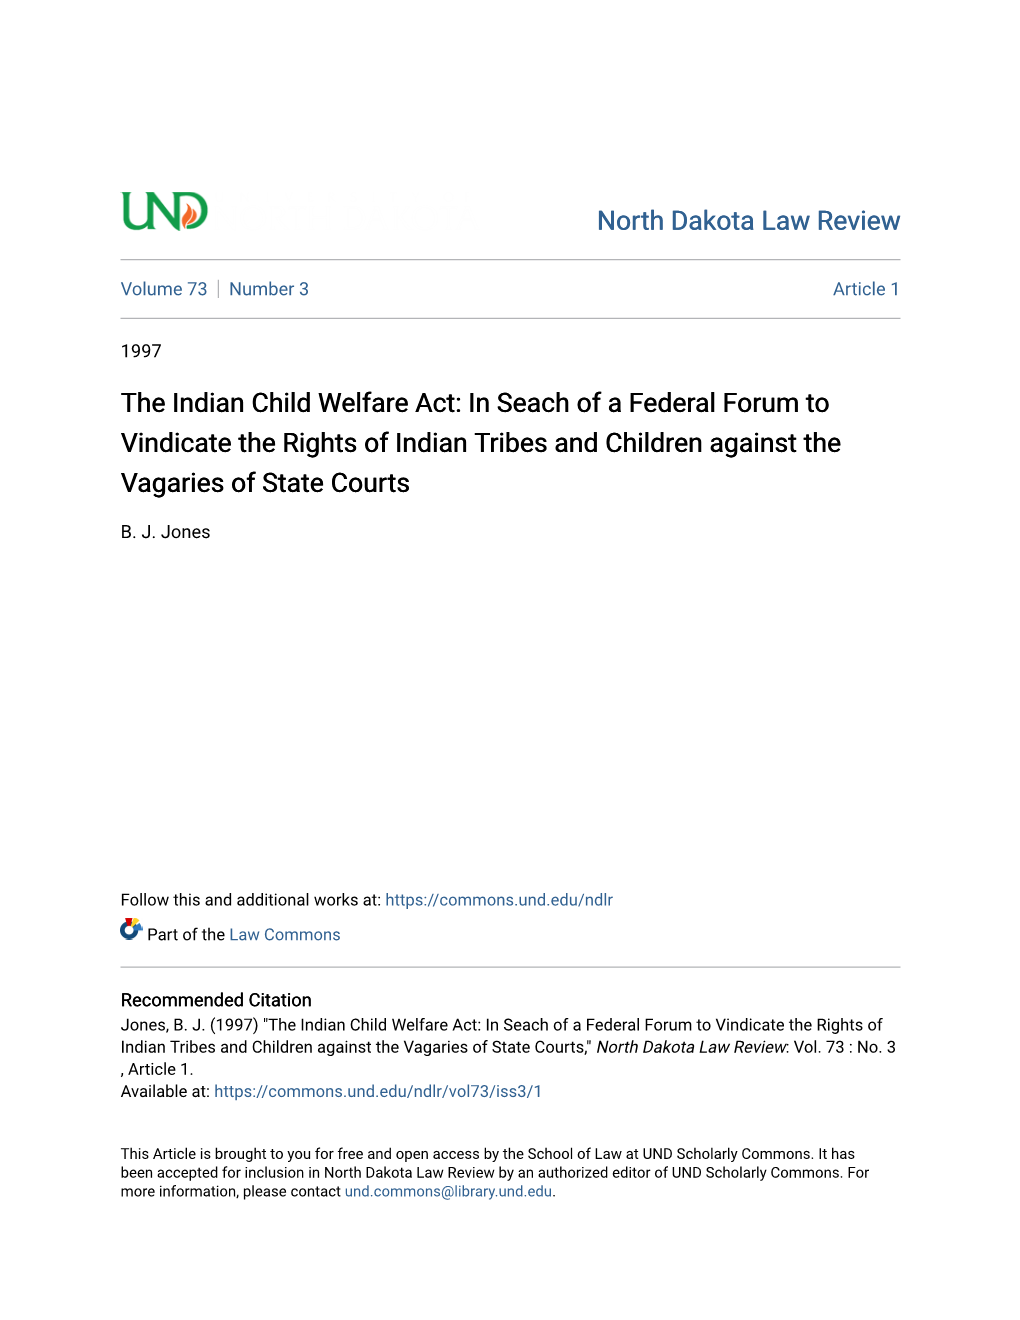 The Indian Child Welfare Act: in Seach of a Federal Forum to Vindicate the Rights of Indian Tribes and Children Against the Vagaries of State Courts